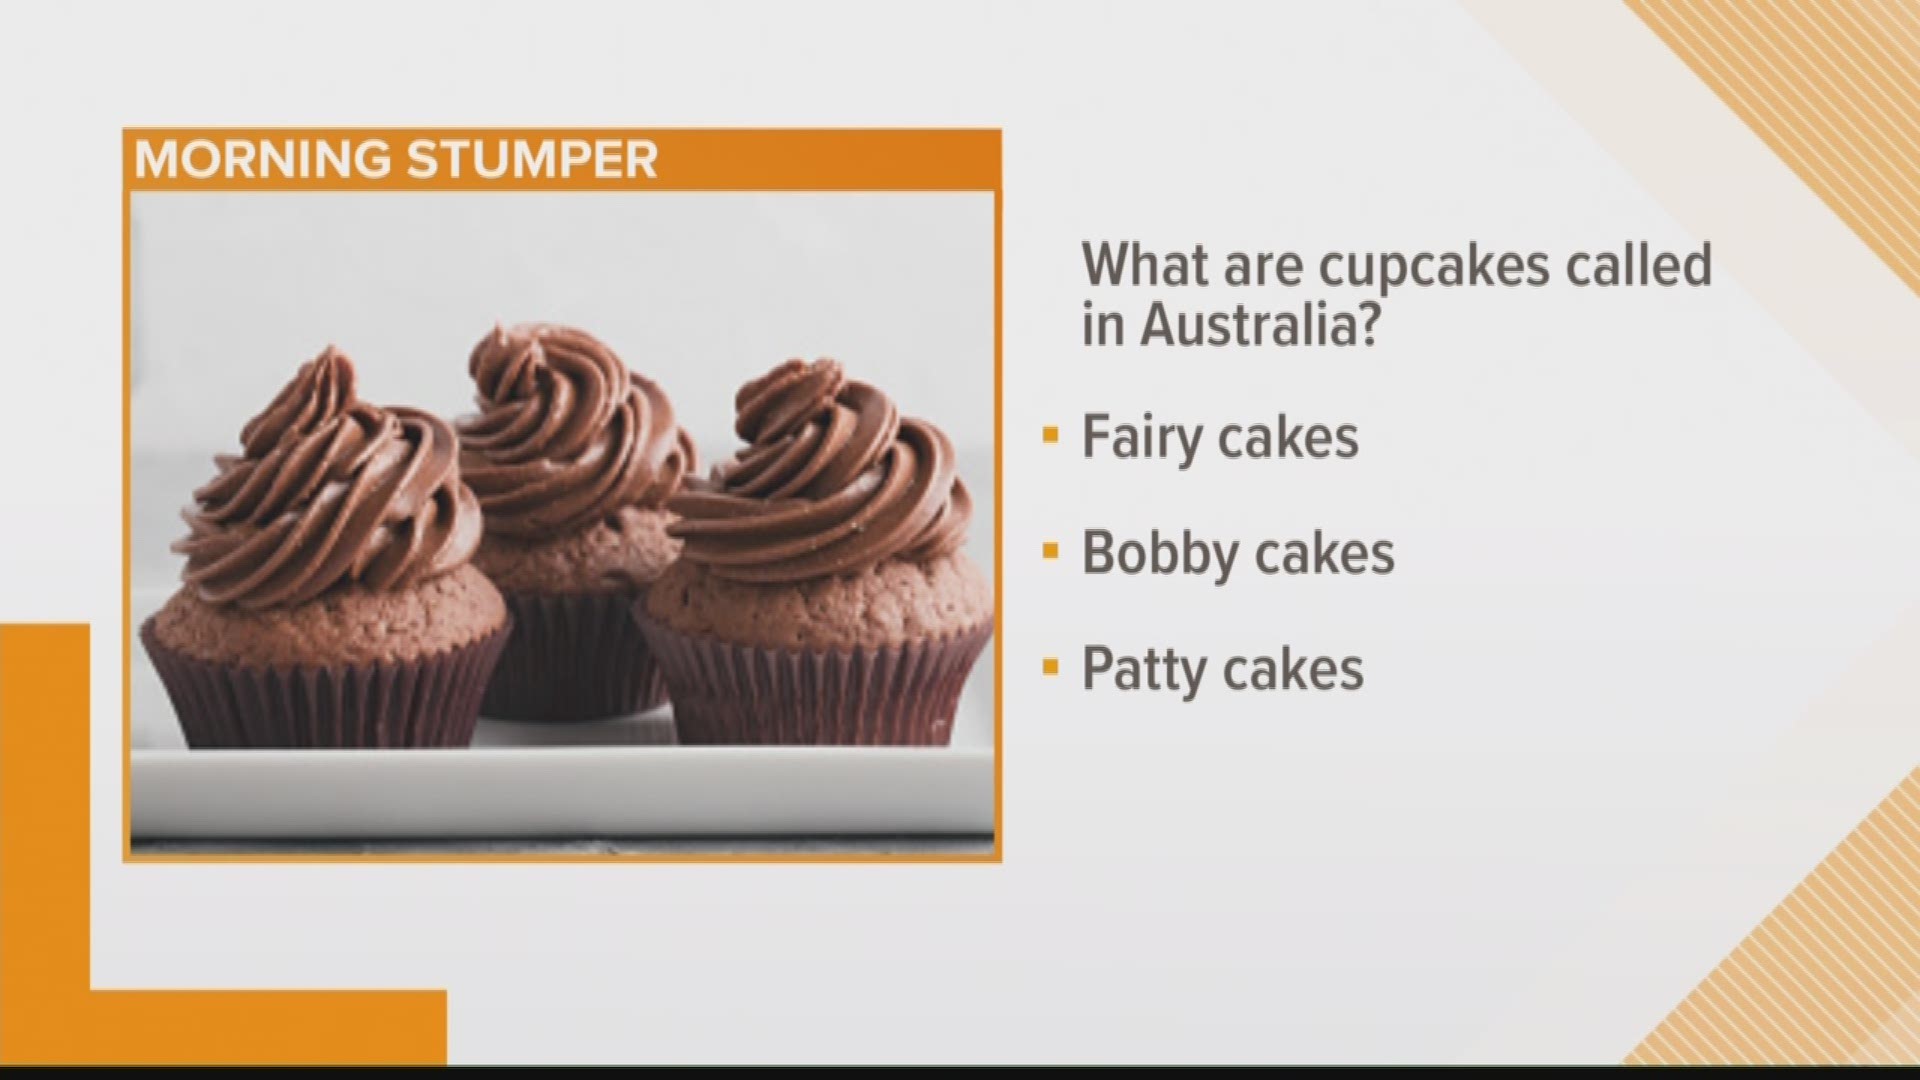 What are cupcakes called in Australia?